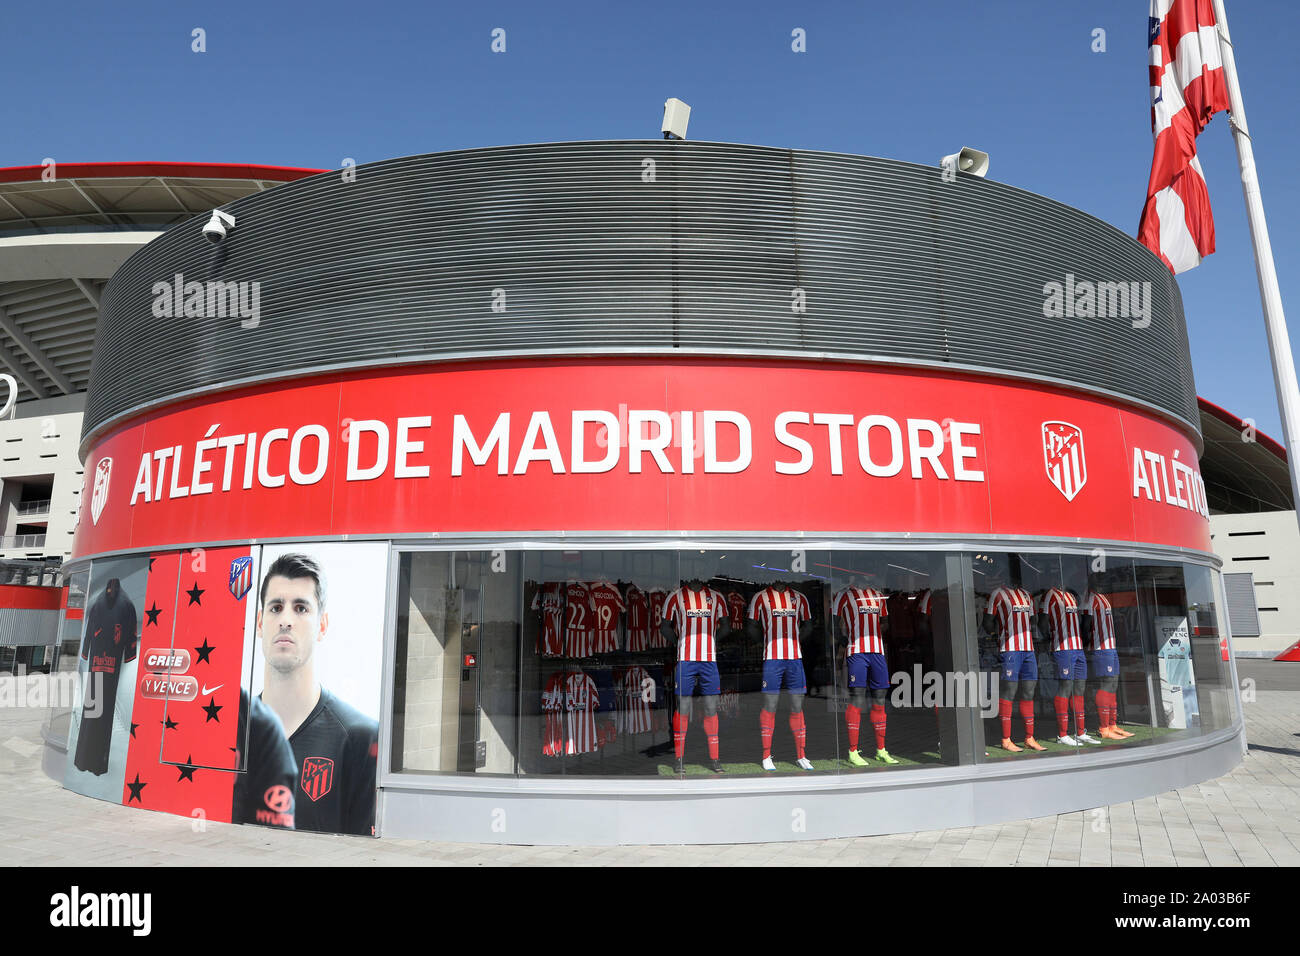 Madrid Spain 18th Sep 2019 Atletico De Madrid Store At